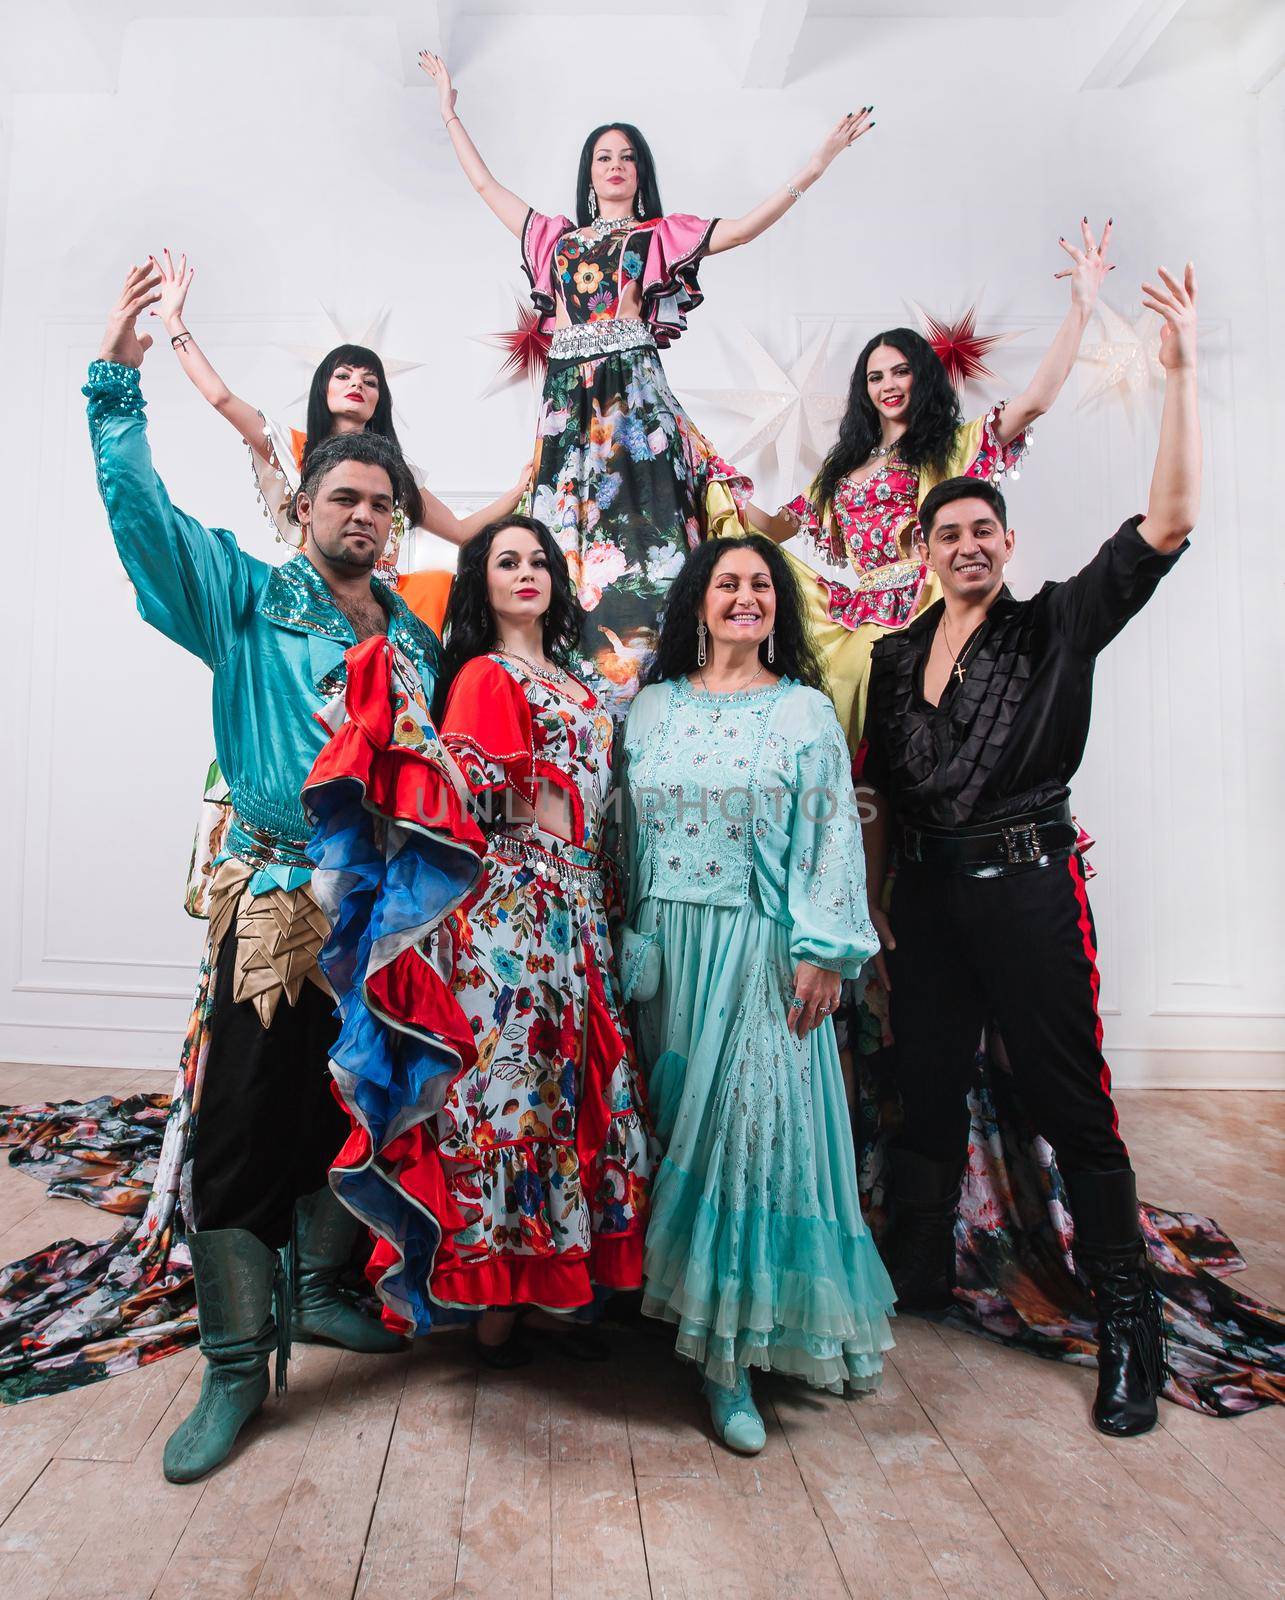 ensemble of Gypsy dance standing on the stage. photo with copy space